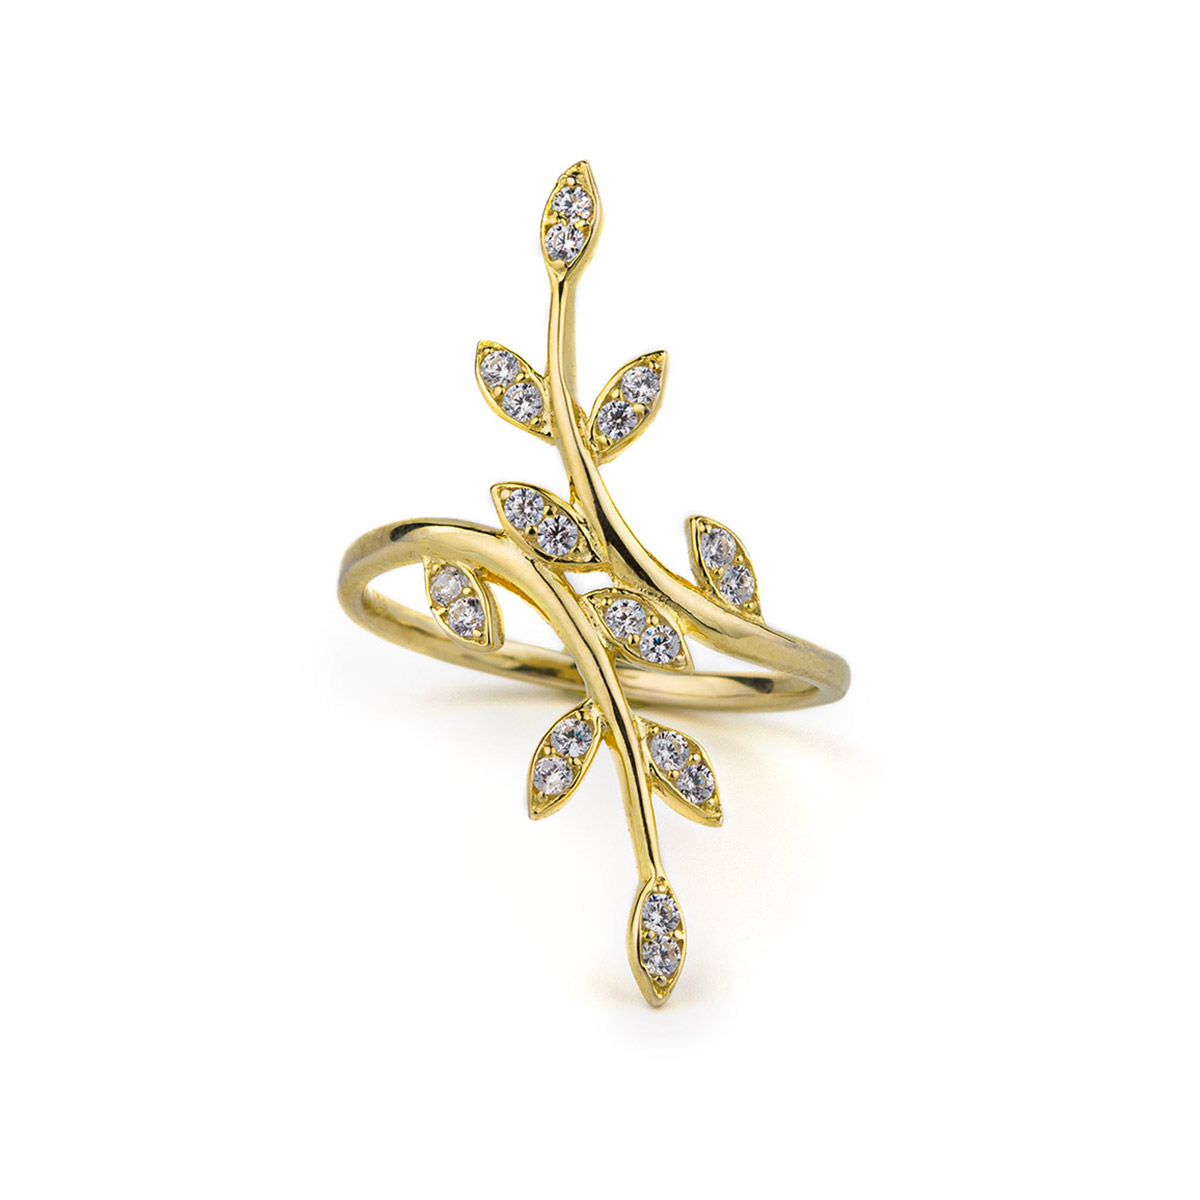 Leaf Branch Ring - 925 Sterling Silver and Gold Plated